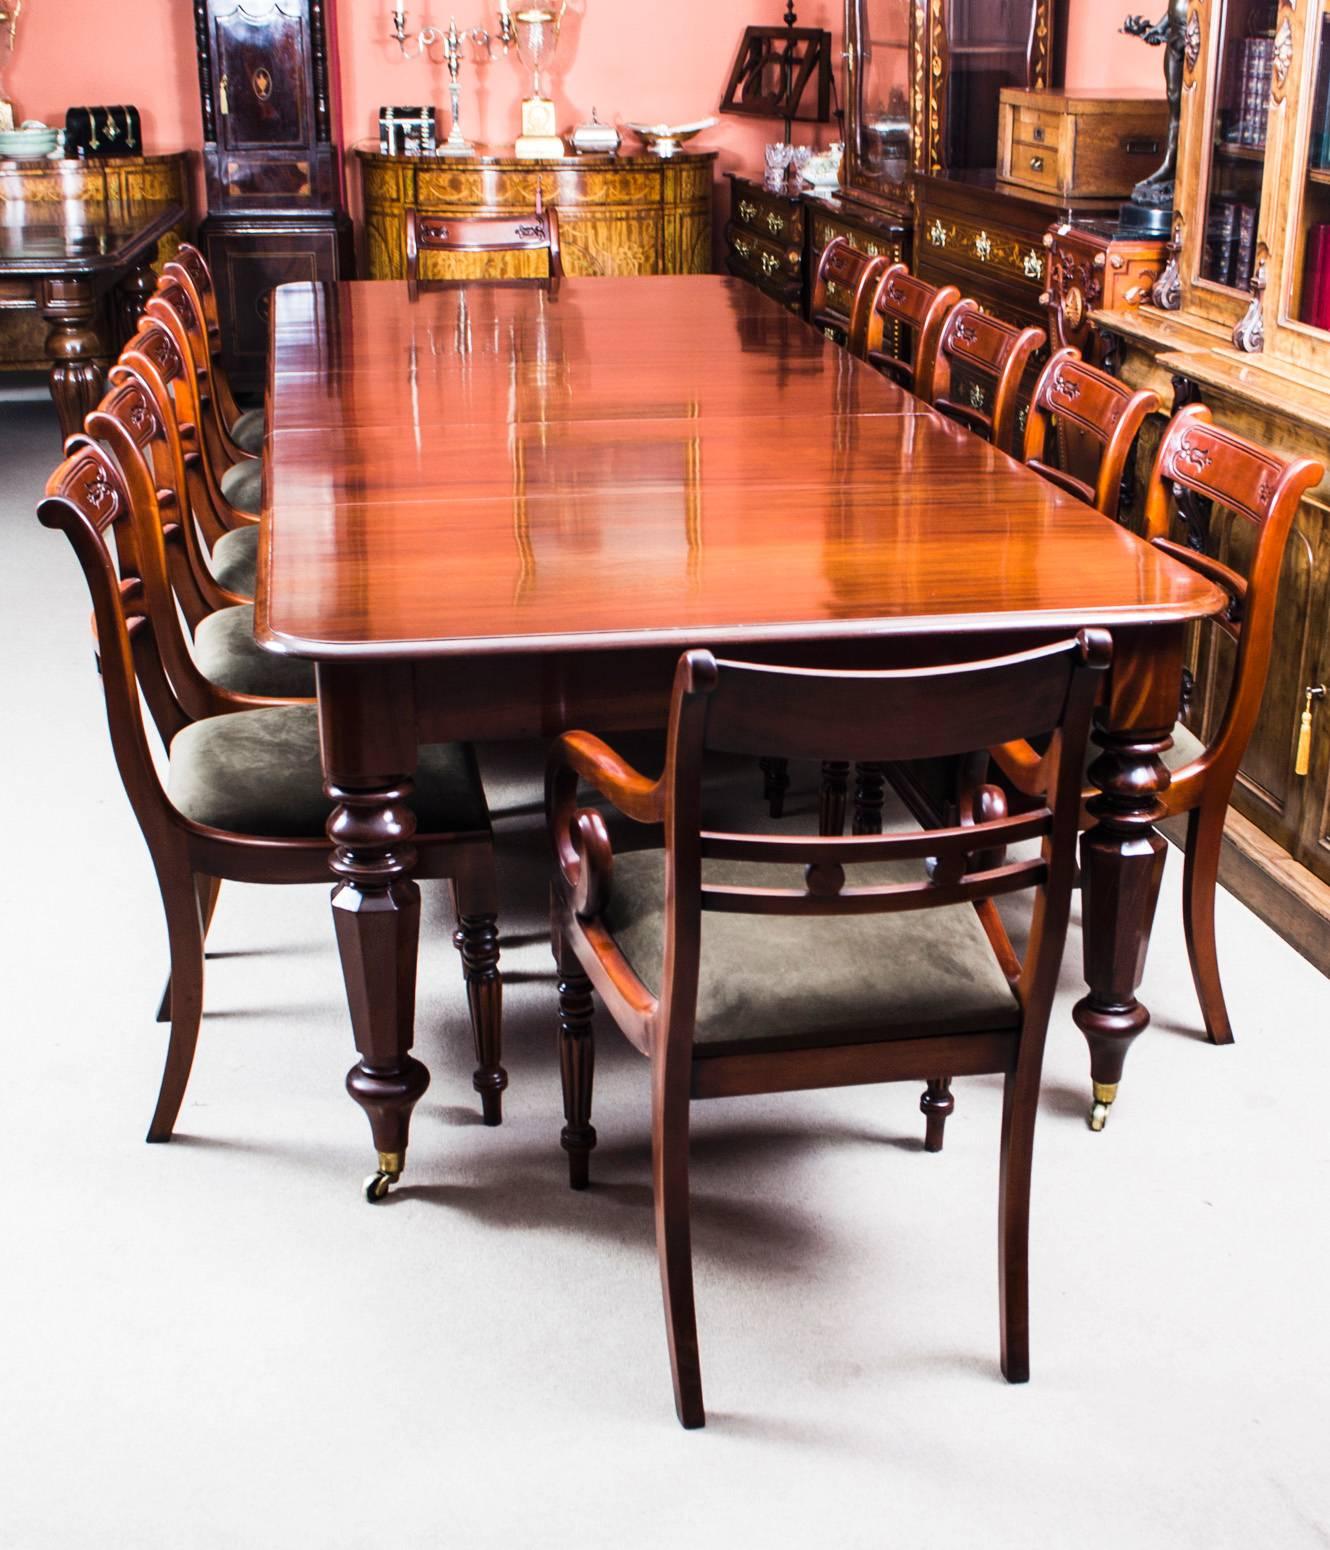 This is a beautiful antique dining set comprising a William IV mahogany dining table, circa 1835 in date and a beautiful set of 12 Vintage Regency style dining chairs.

This striking table has three original leaves and can sit twelve people in